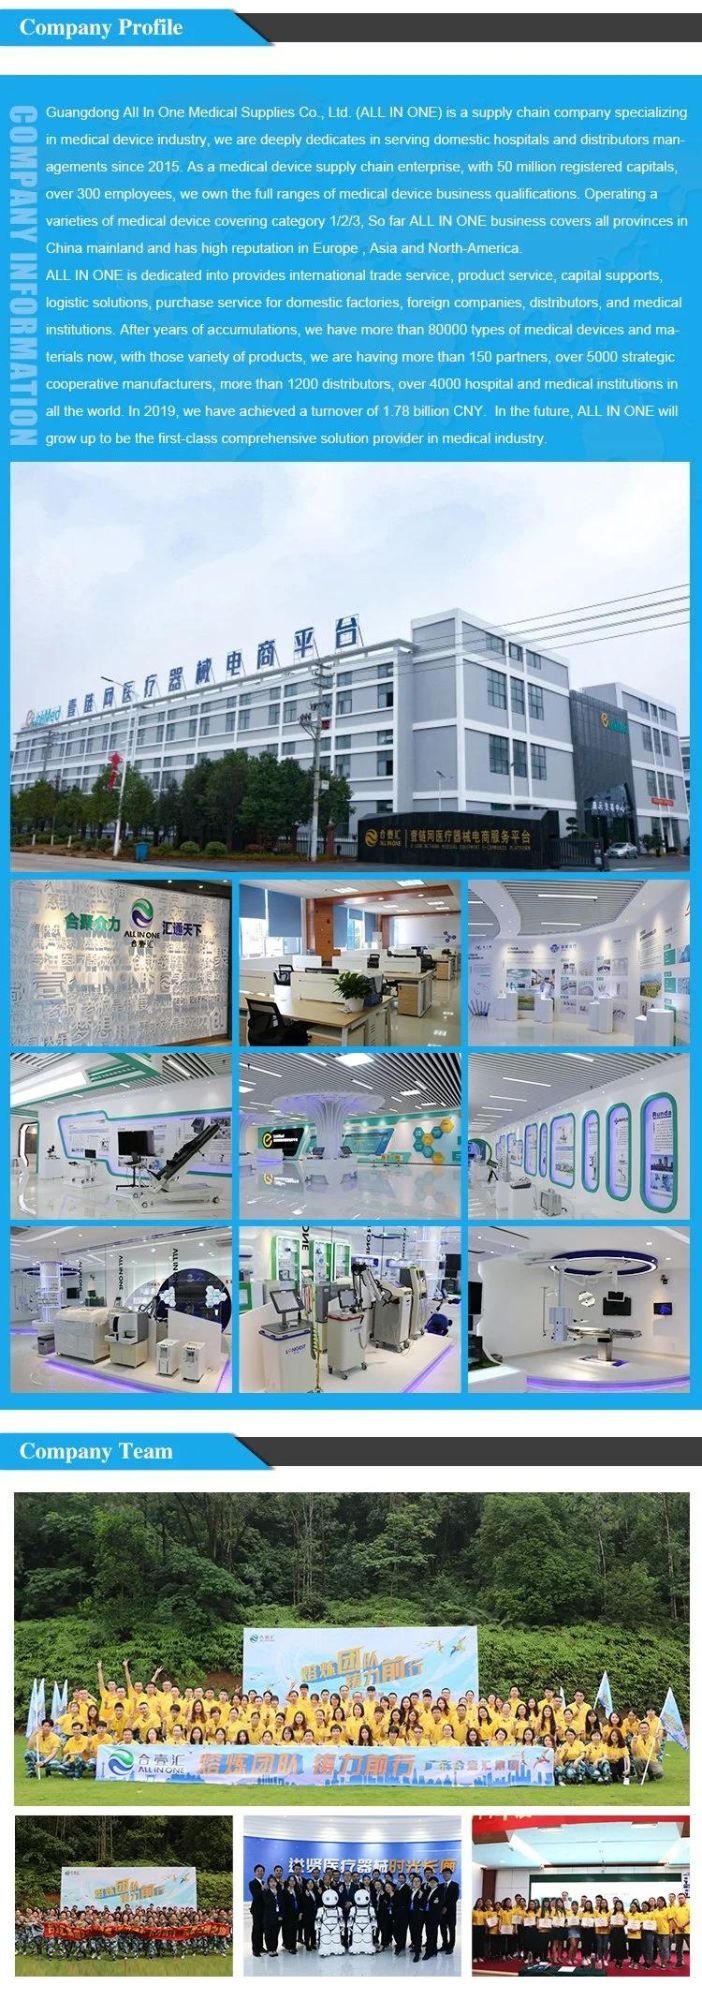 CE ISO Approved 3 Functions ICU Electric Hospital Bed